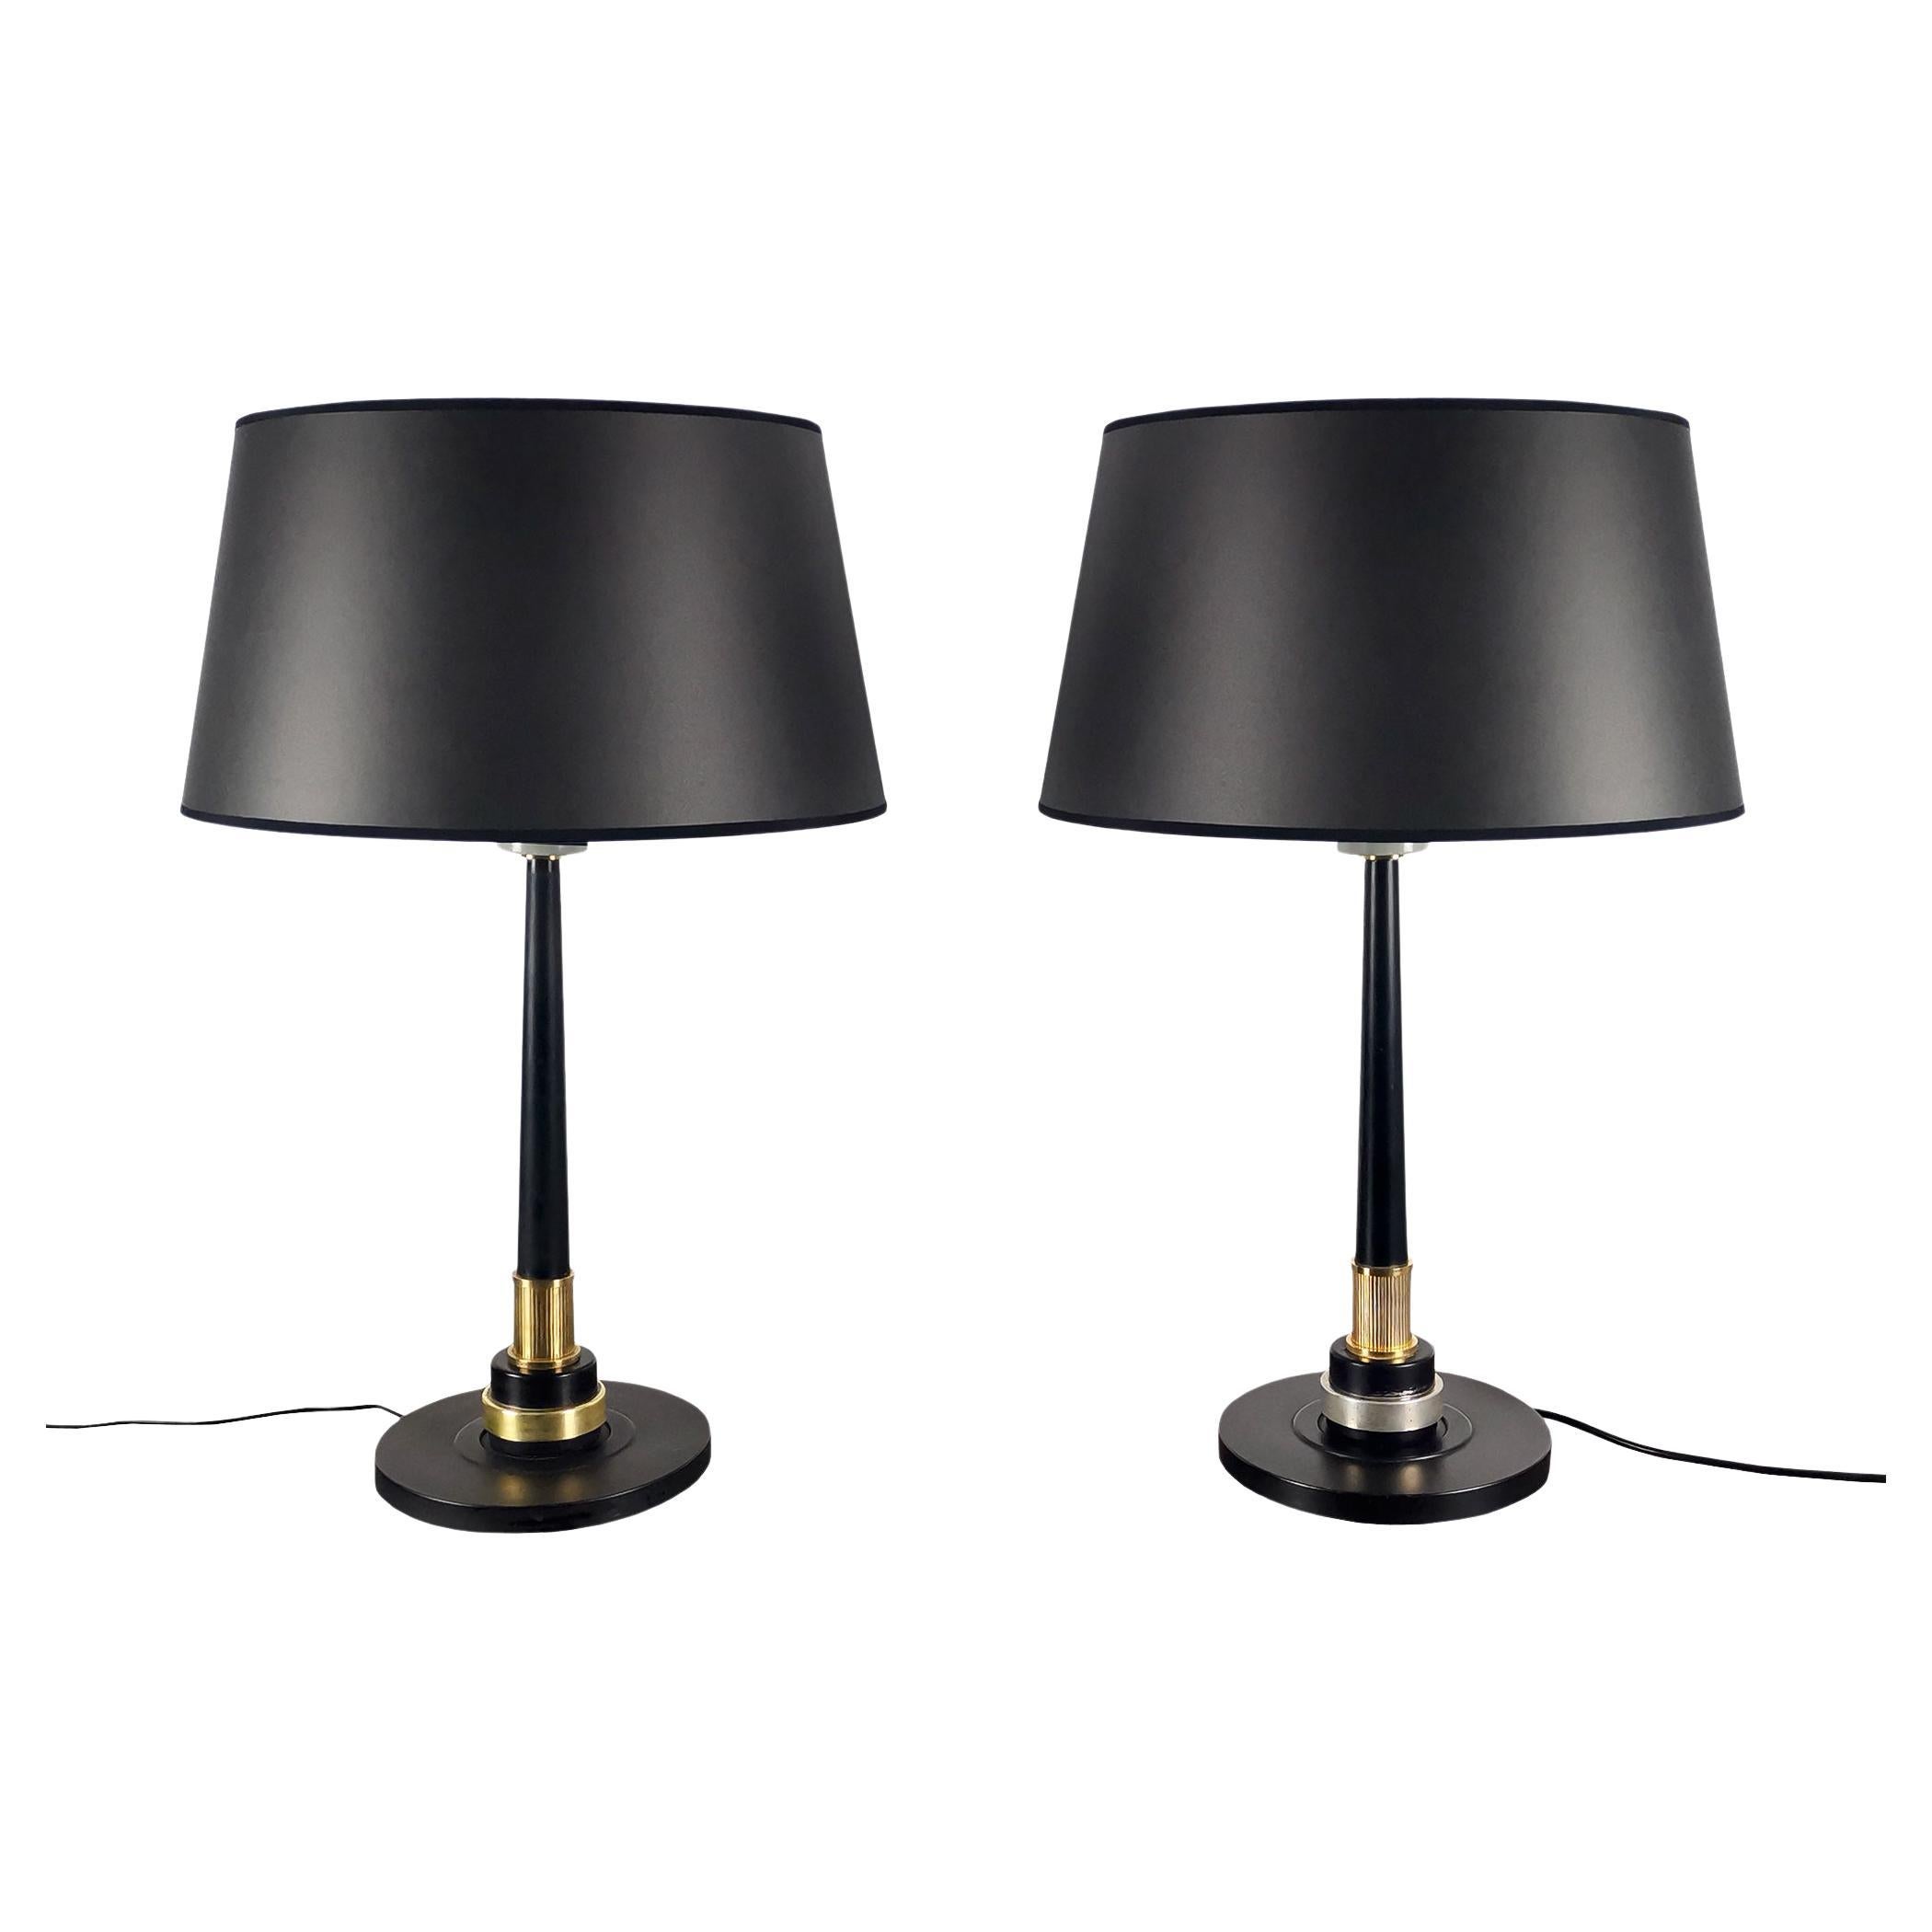 Pair of Mid-Century Modern Mazda Lamps With New Lampshades - France, 1950 For Sale